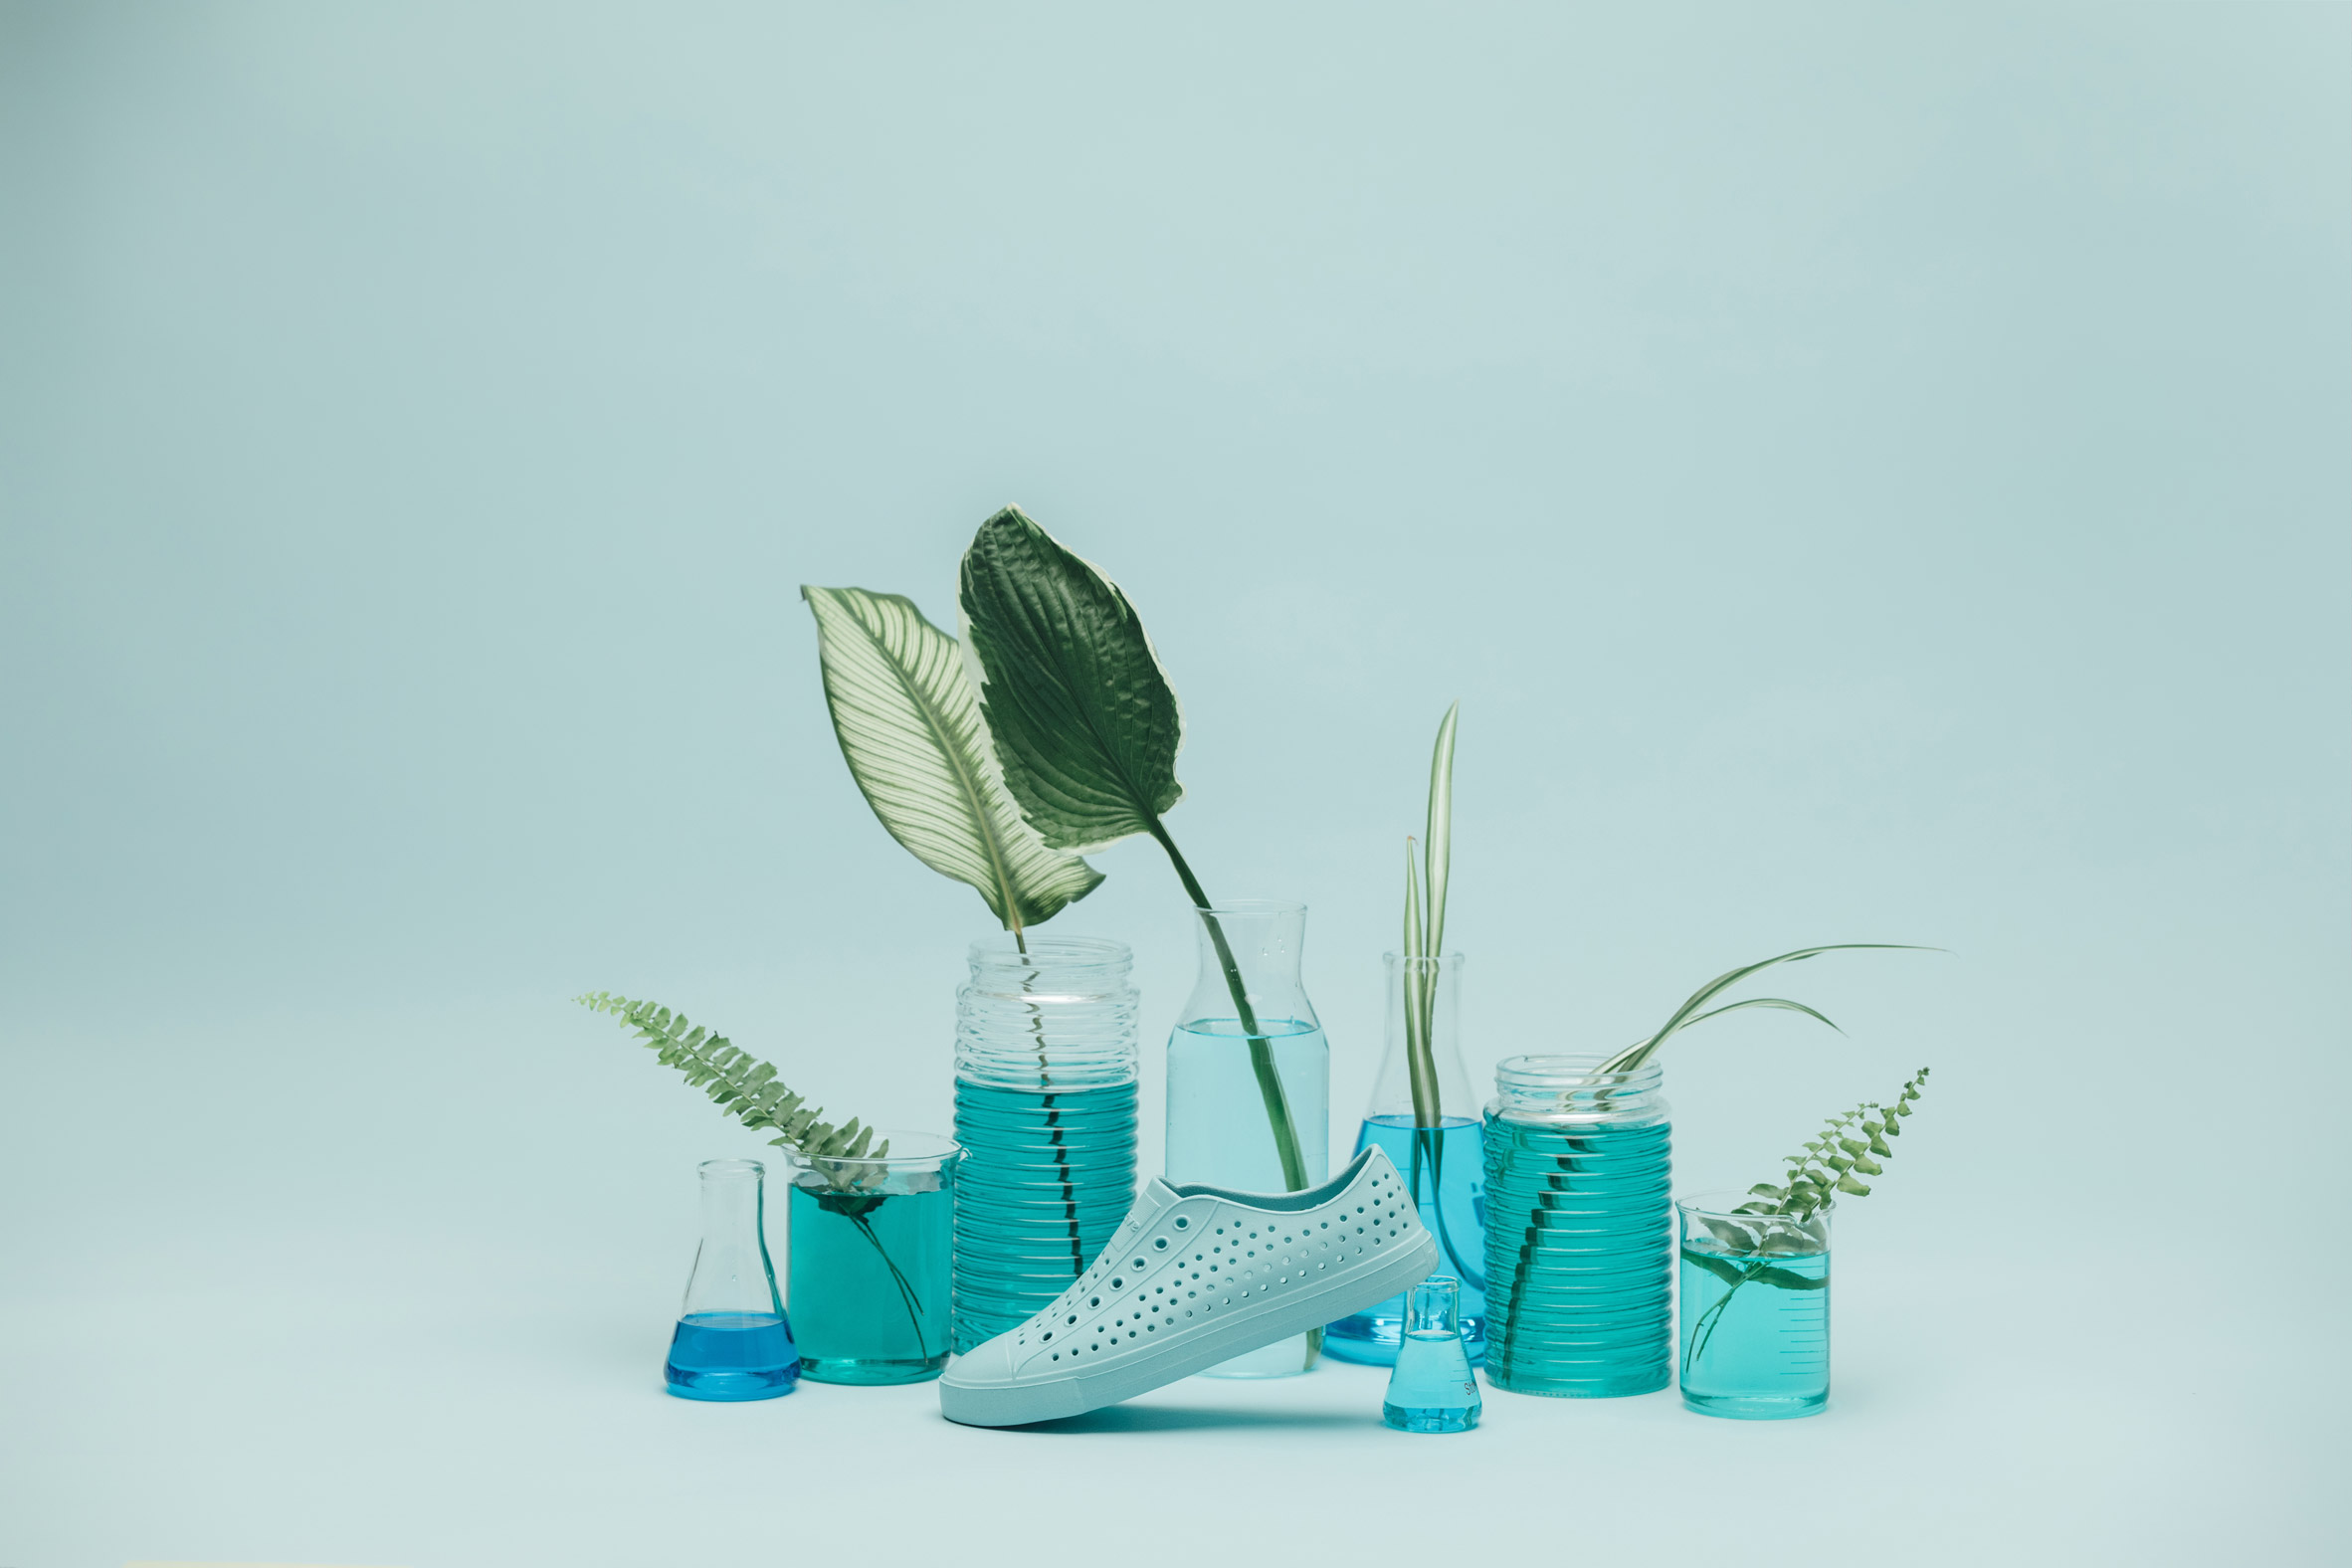 Native Shoes create trainers from single piece of algae-laced foam